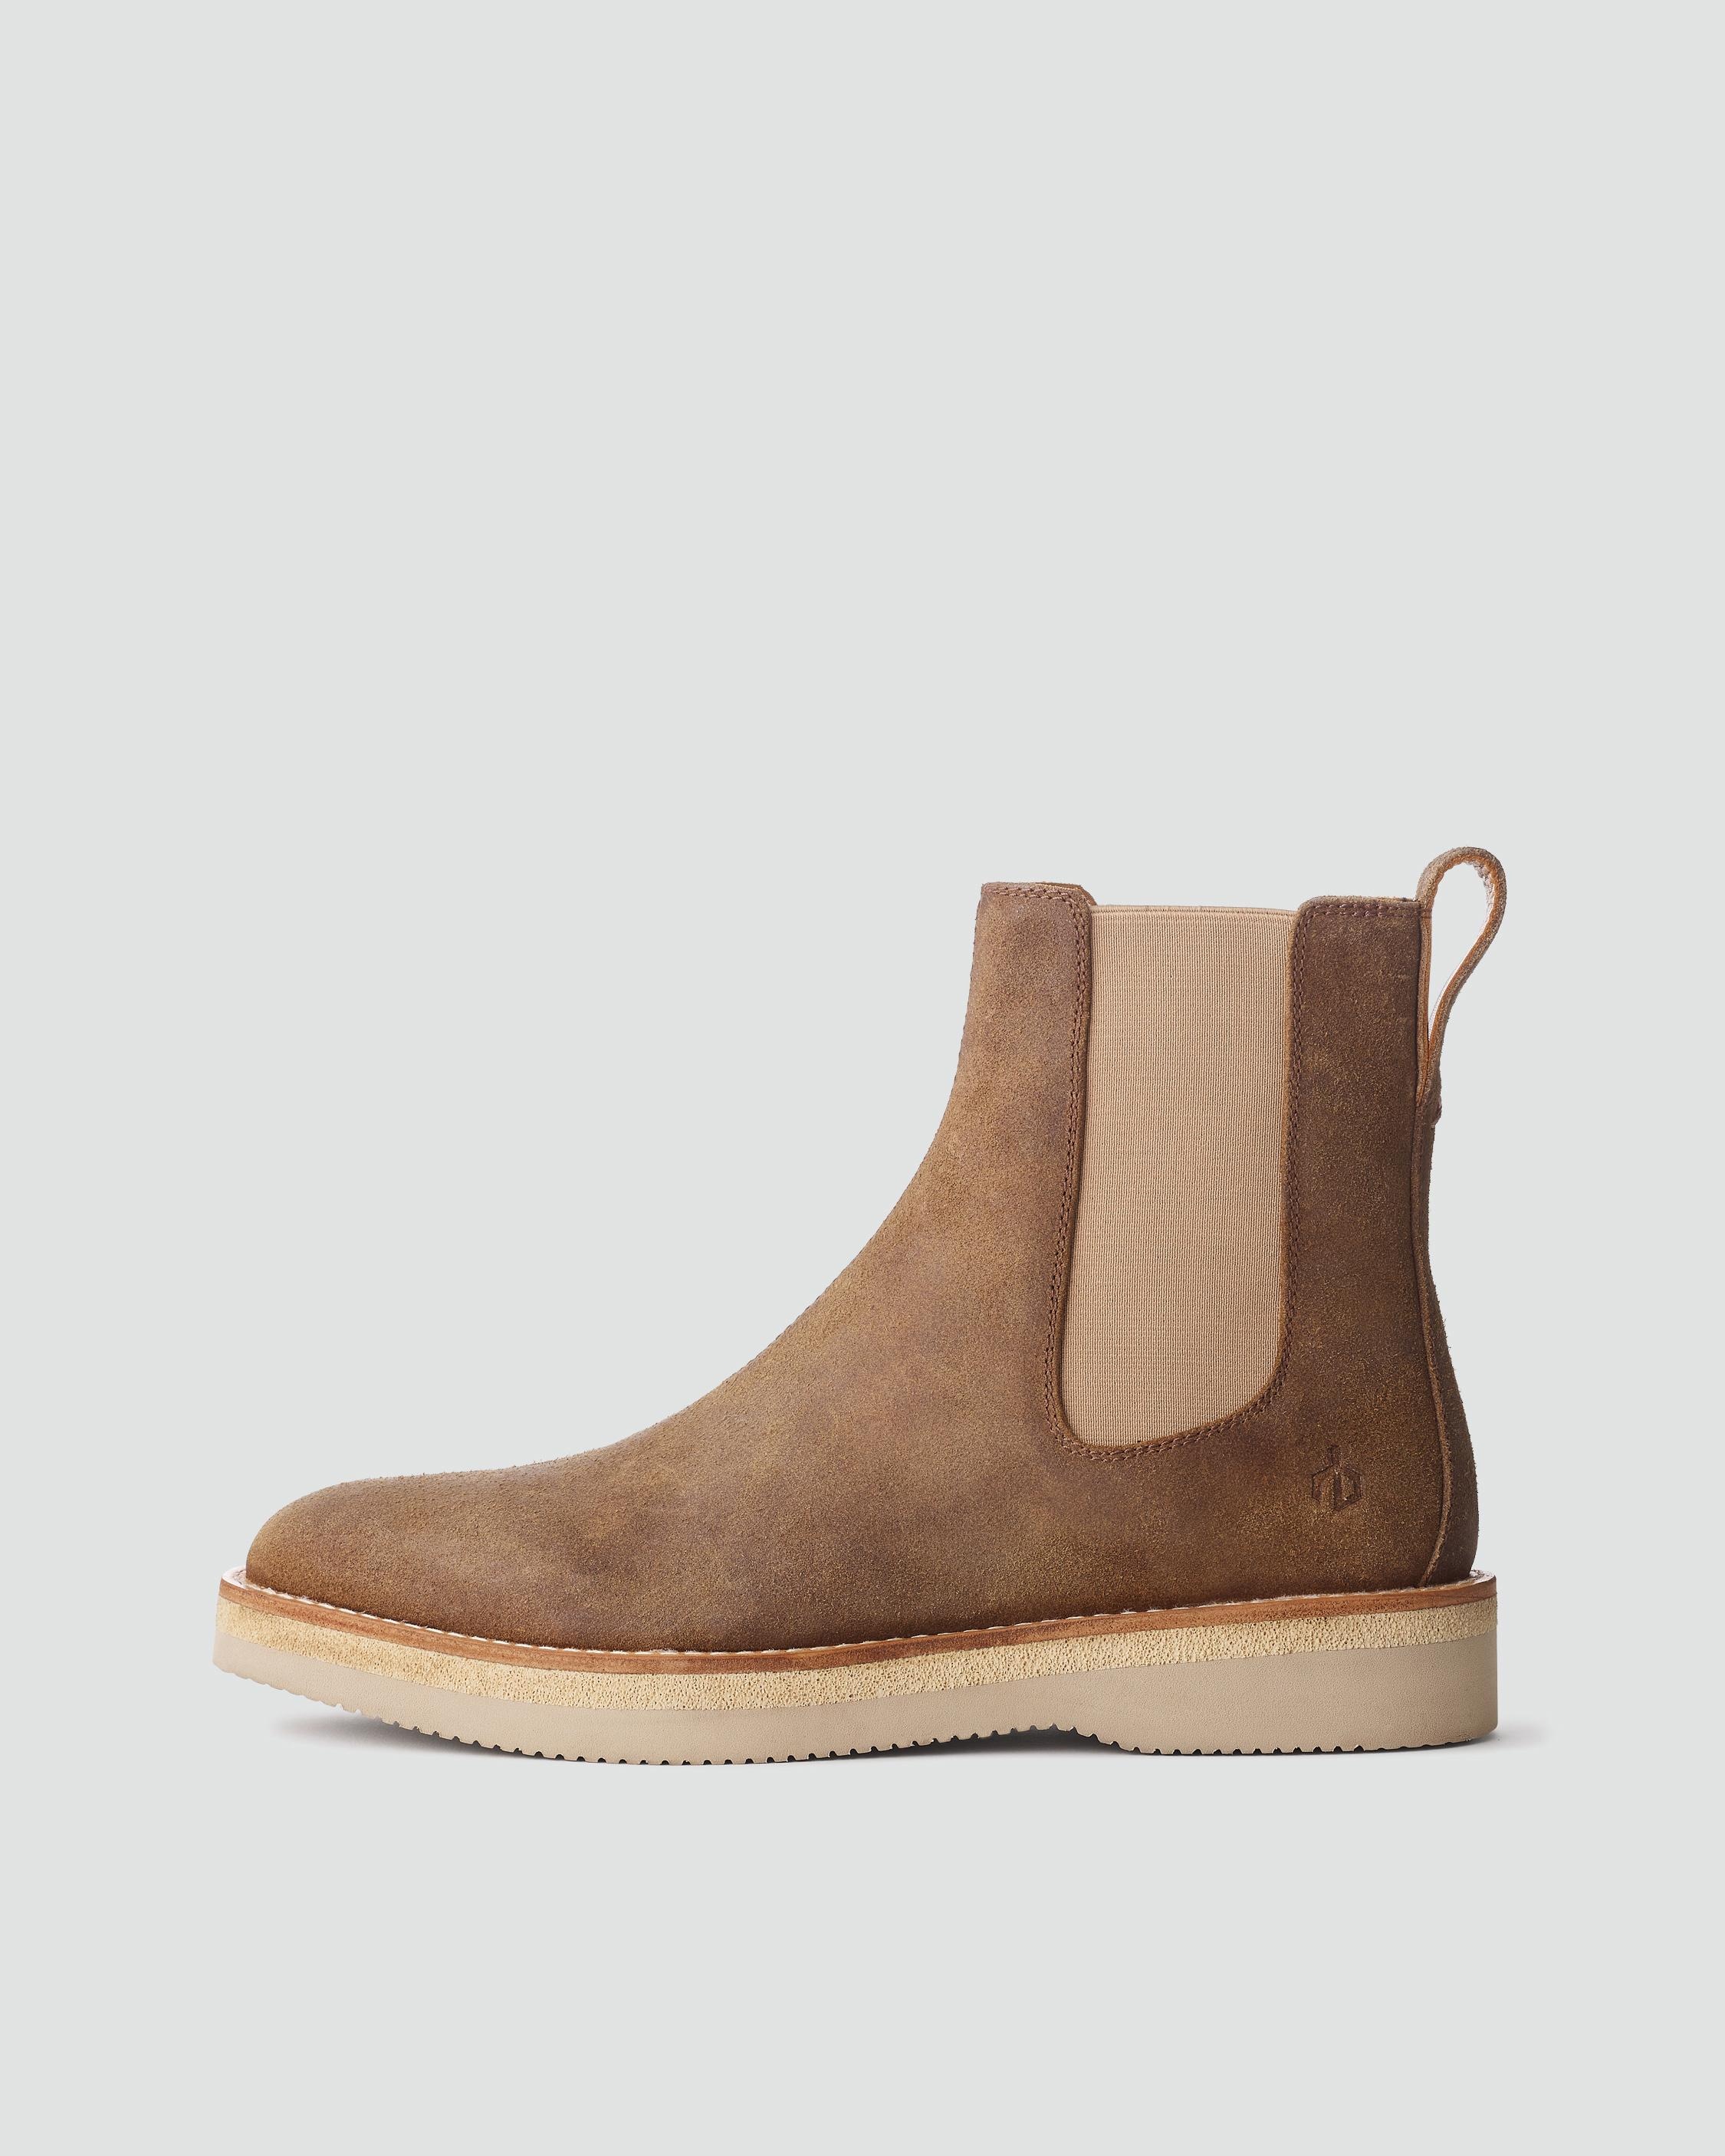 Bedford Boot - Suede
Chelsea Boot - 1